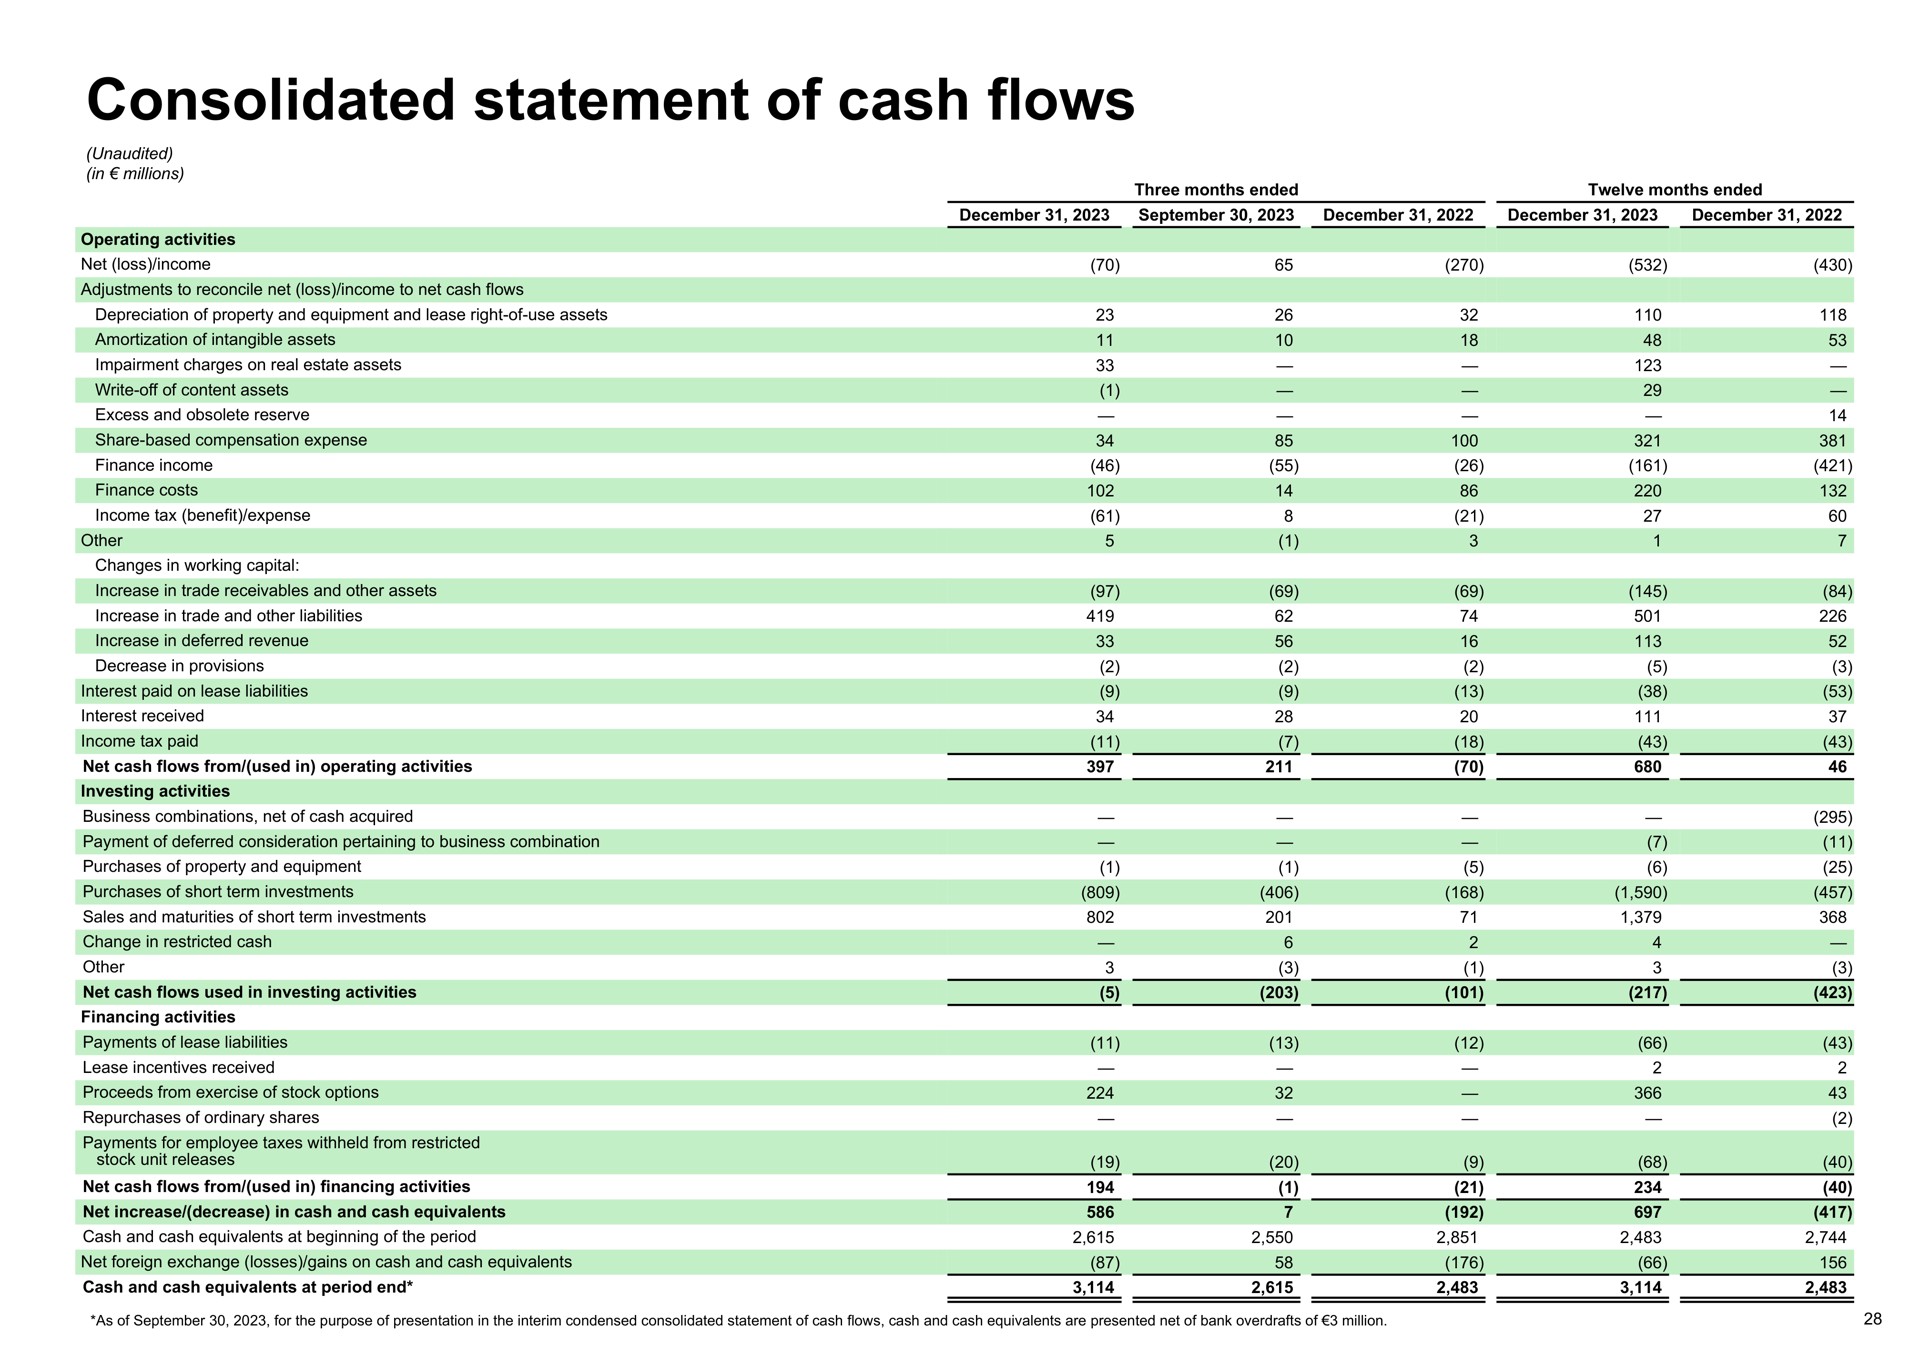 consolidated statement of cash flows | Spotify